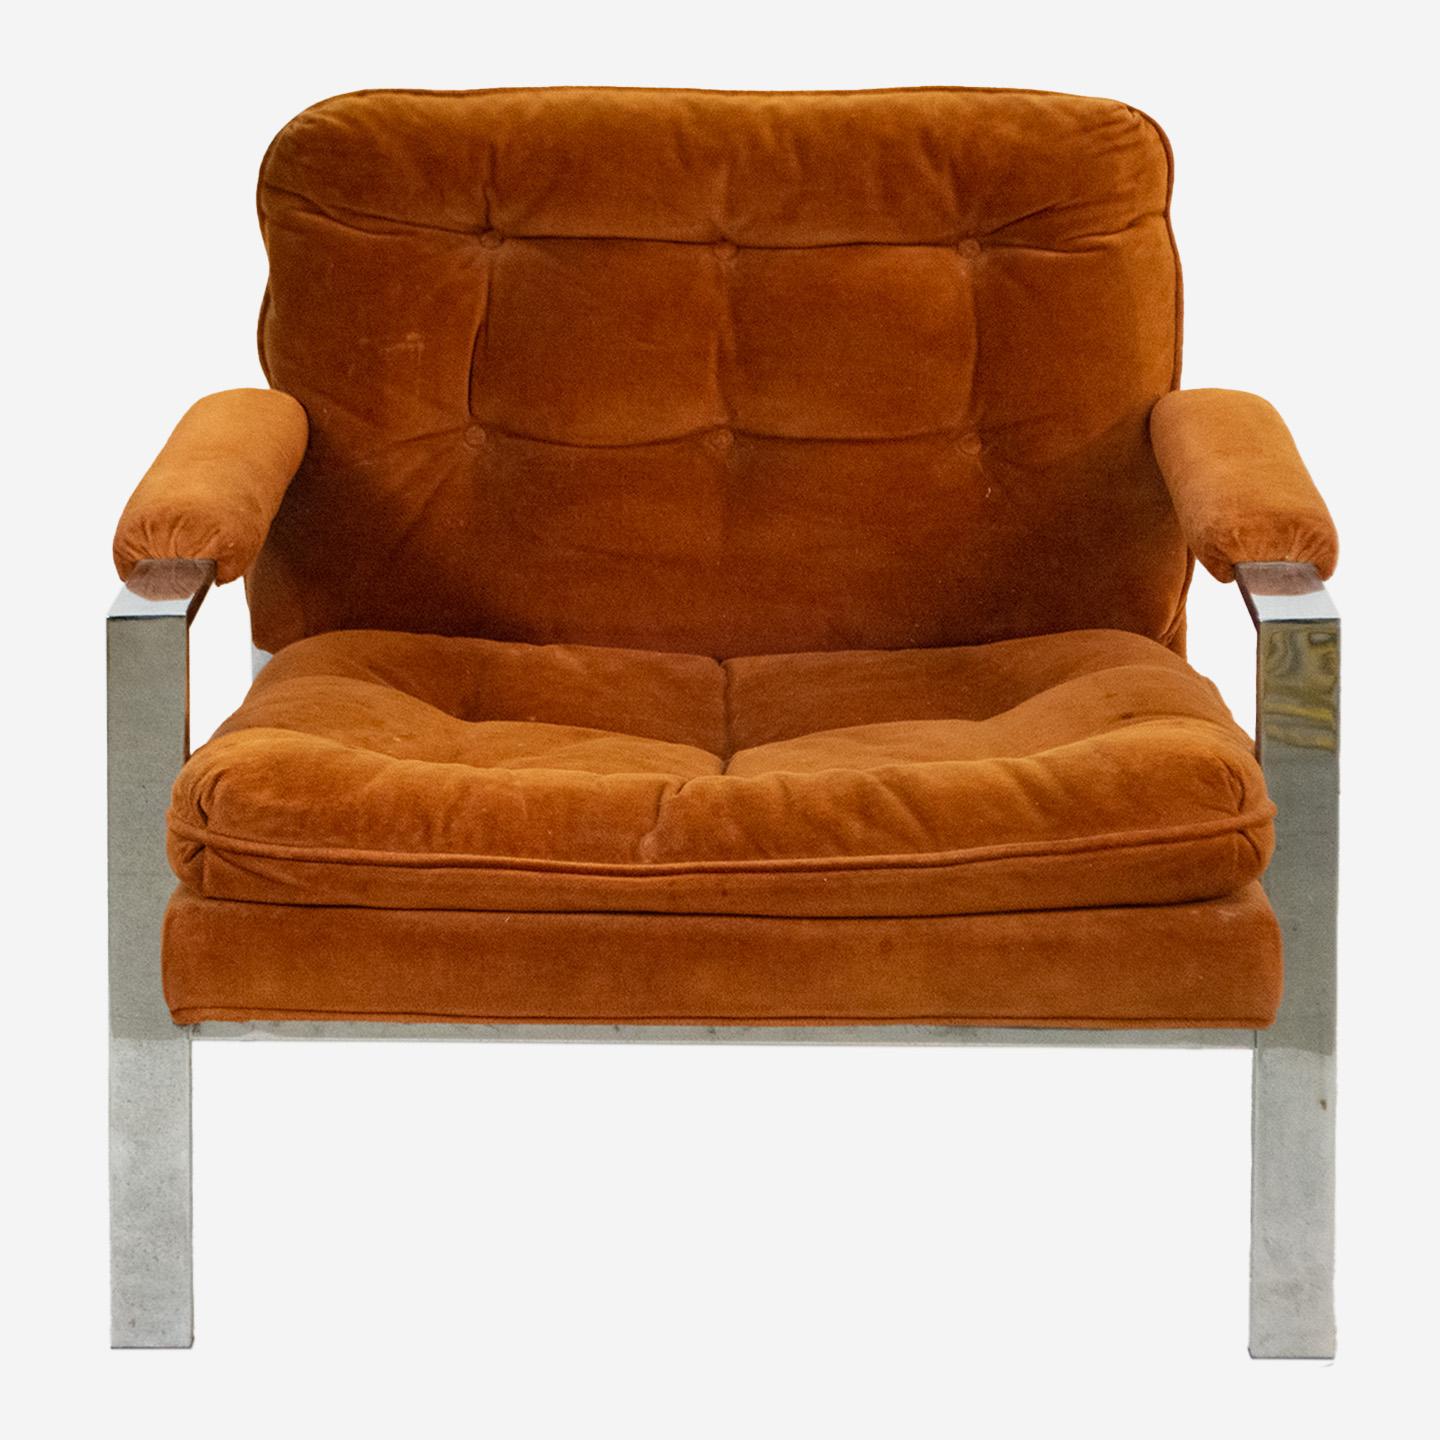 Vintage Milo Baughman style flat bar lounge armchair featuring the iconic flat bar chrome frame, upholstered cushions and armrests in rust velvet fabric. Timeless clean lines with its modern look make this piece sought after by many. The fabric is